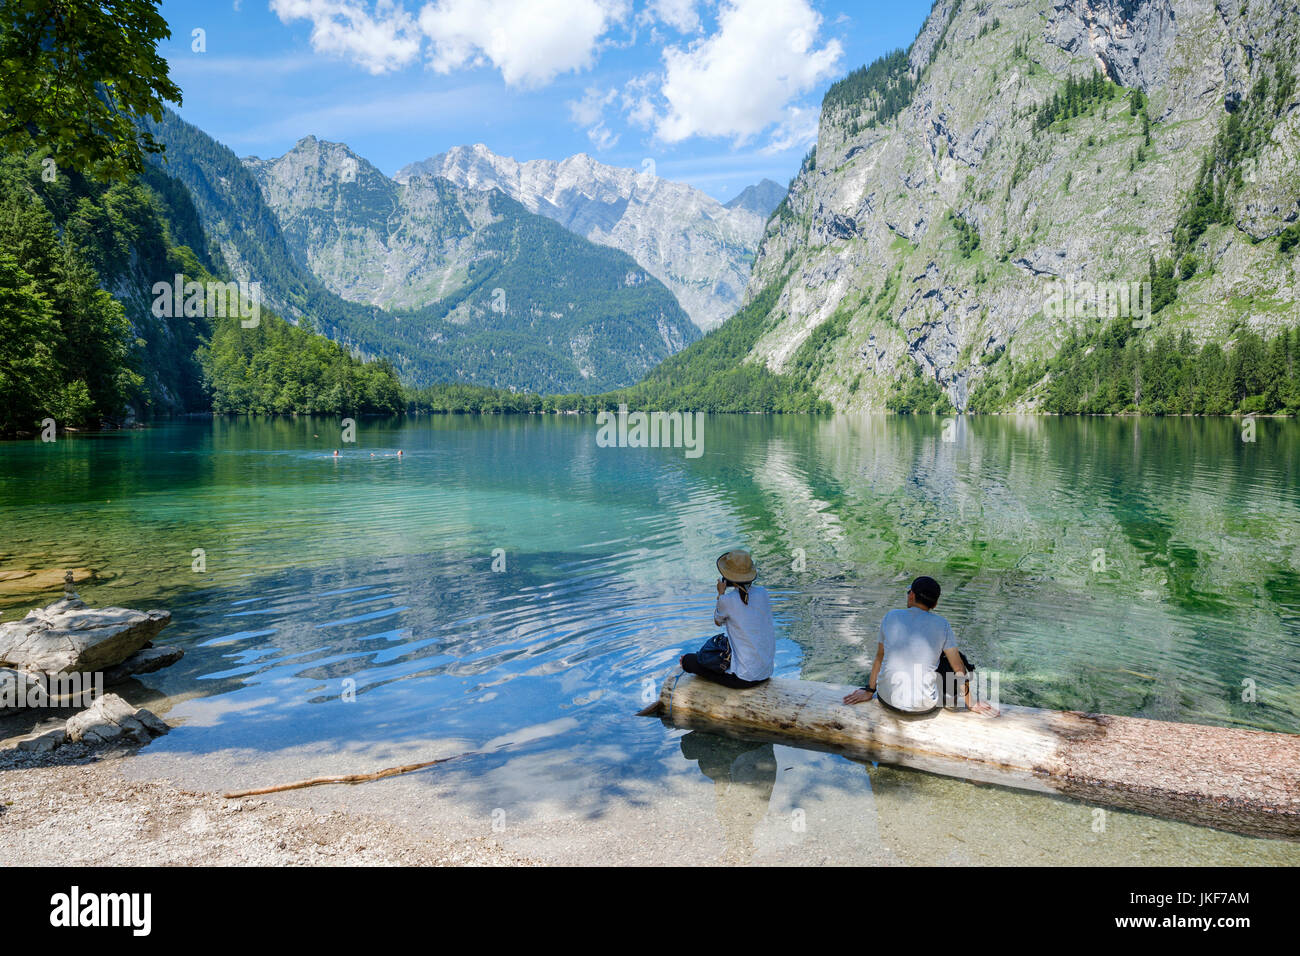 Lac Obersee, Upper Bavaria, Bavaria, Germany, Europe Banque D'Images